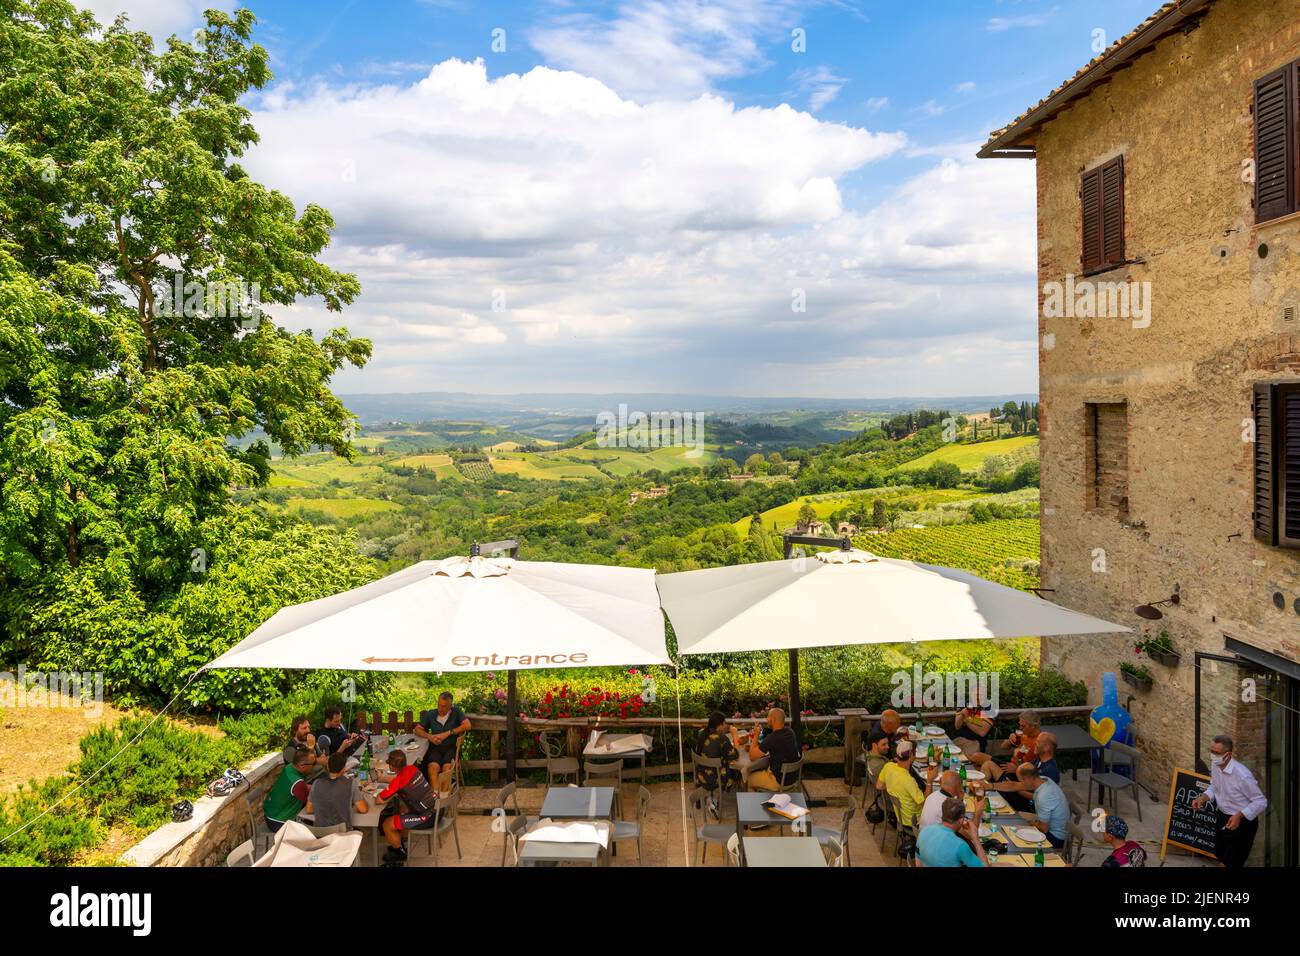 A picturesque cafe overlooking the hills and countryside of Tuscany in the hilltop town of San Gimignano, Italy. Stock Photo